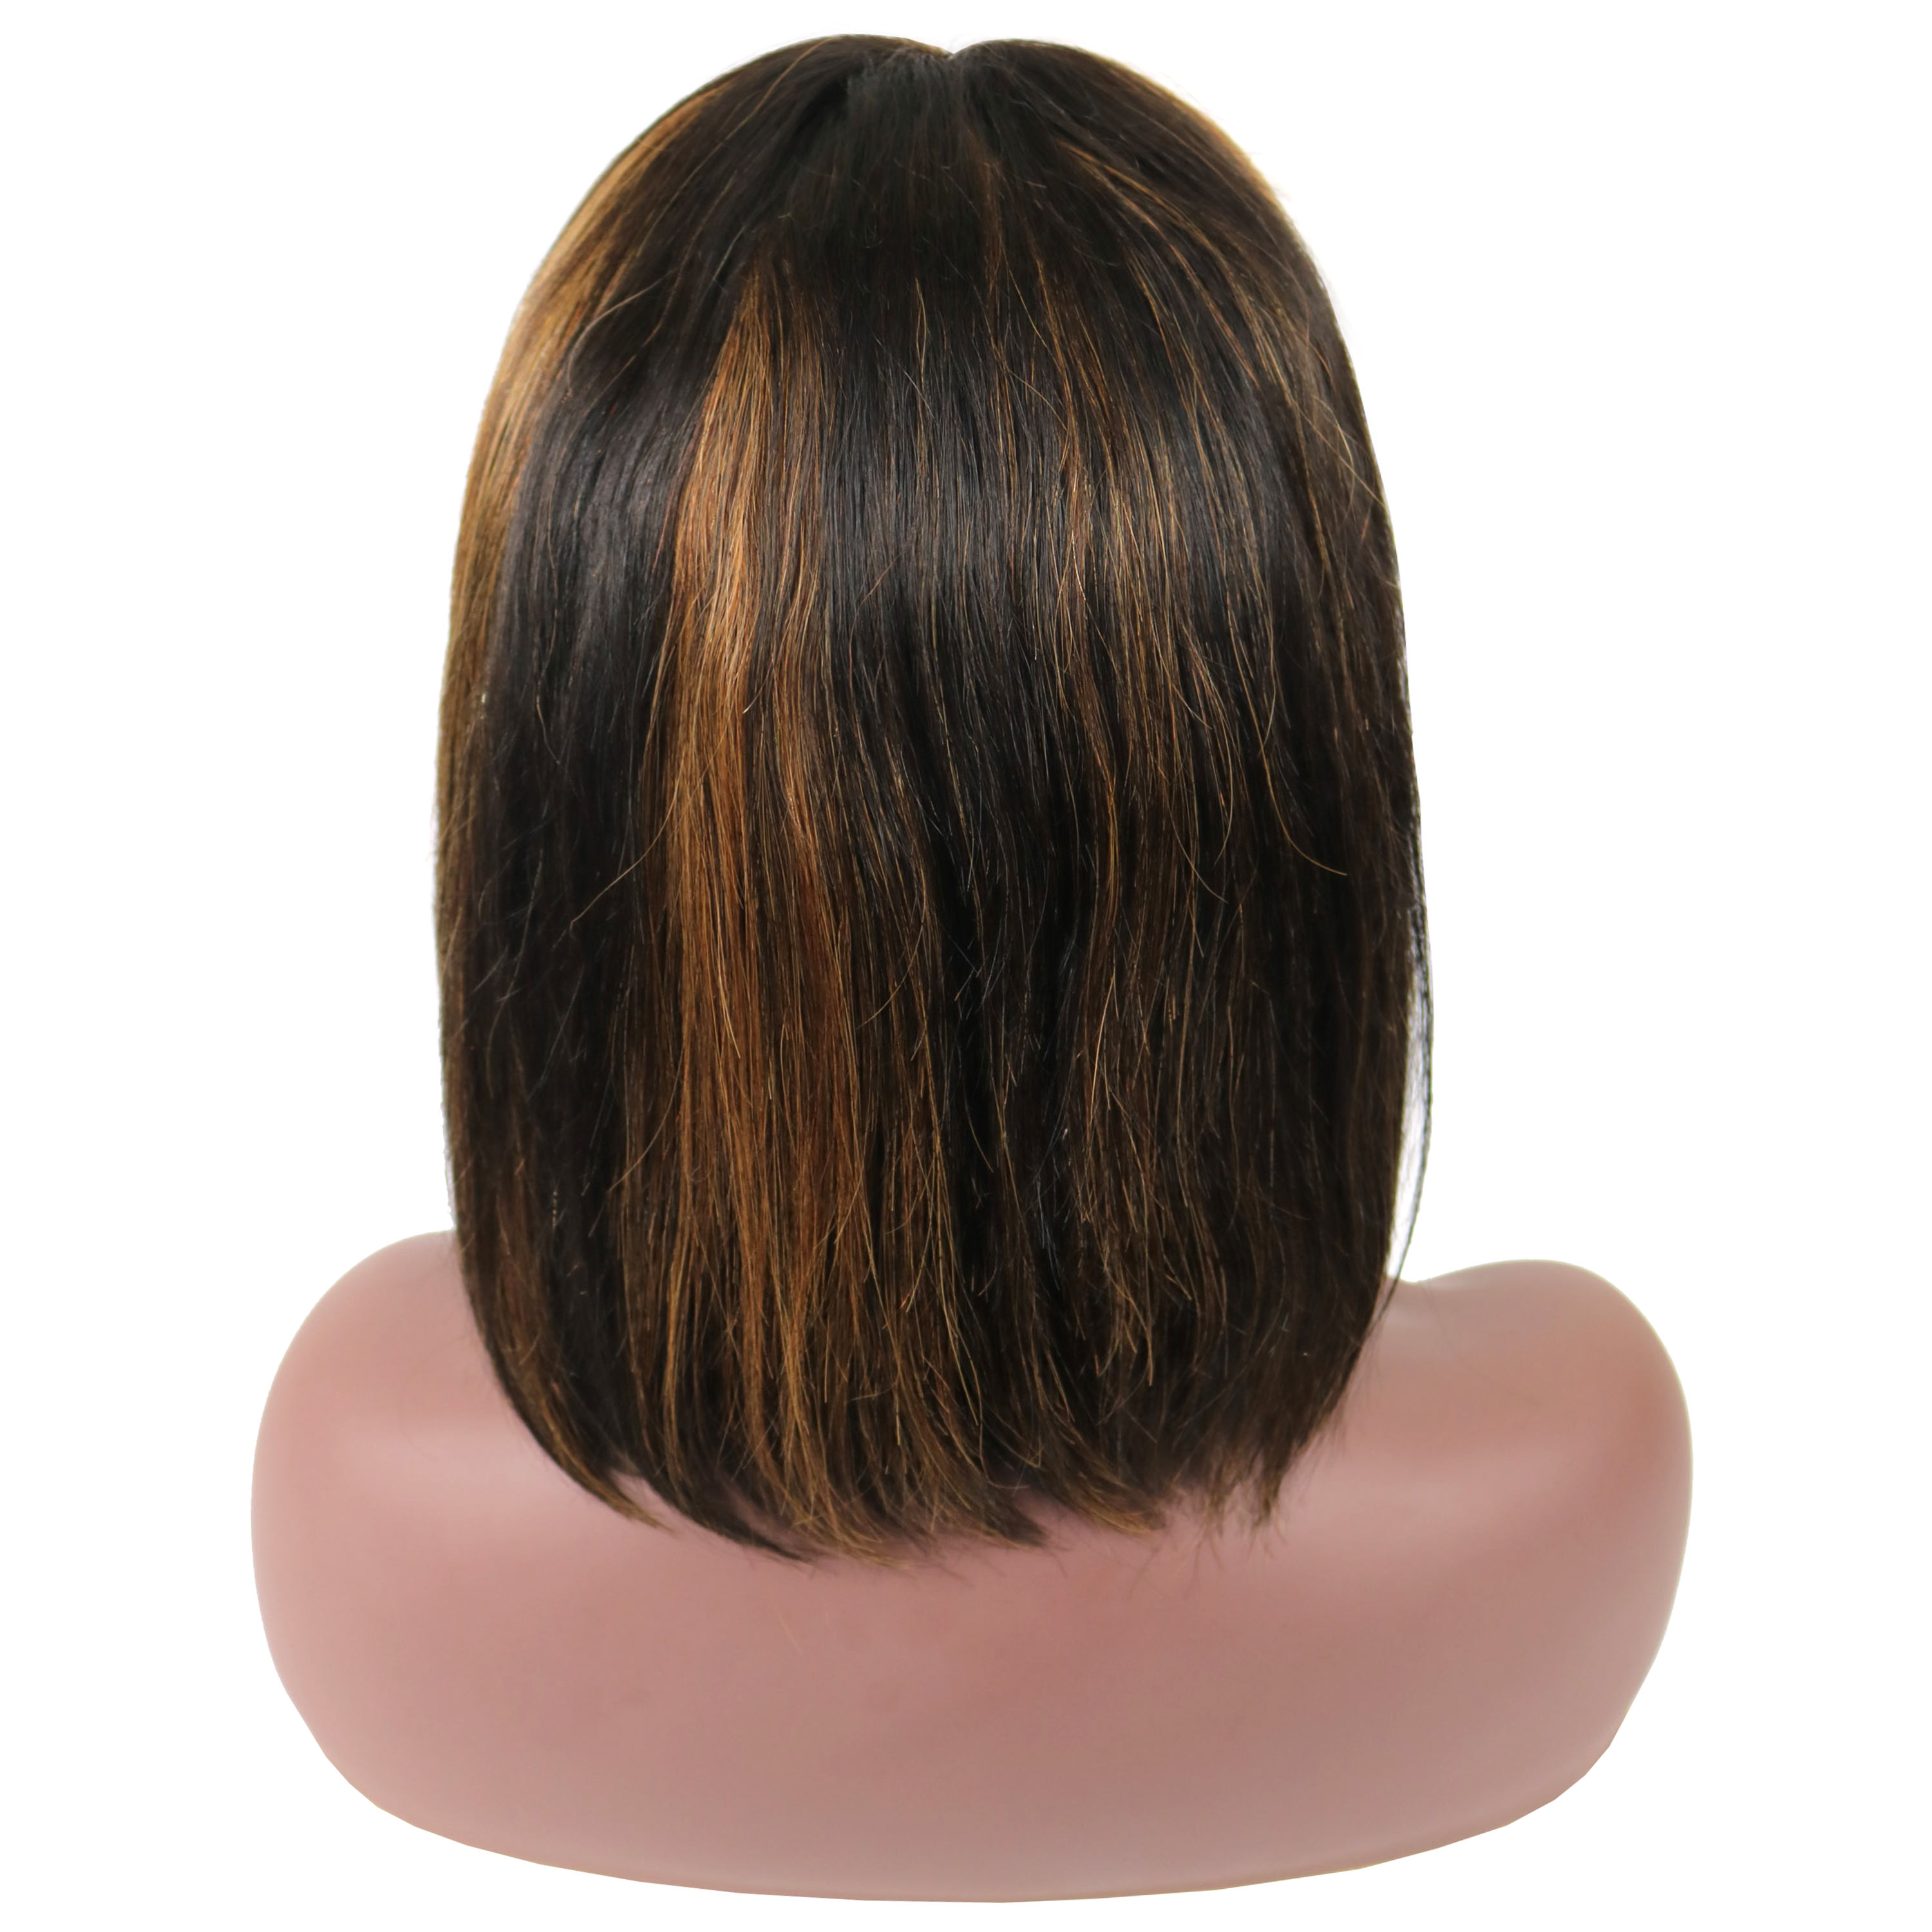 Gabrielle Union Medium Straight Lace Front Human Hair Wig 14 Inches